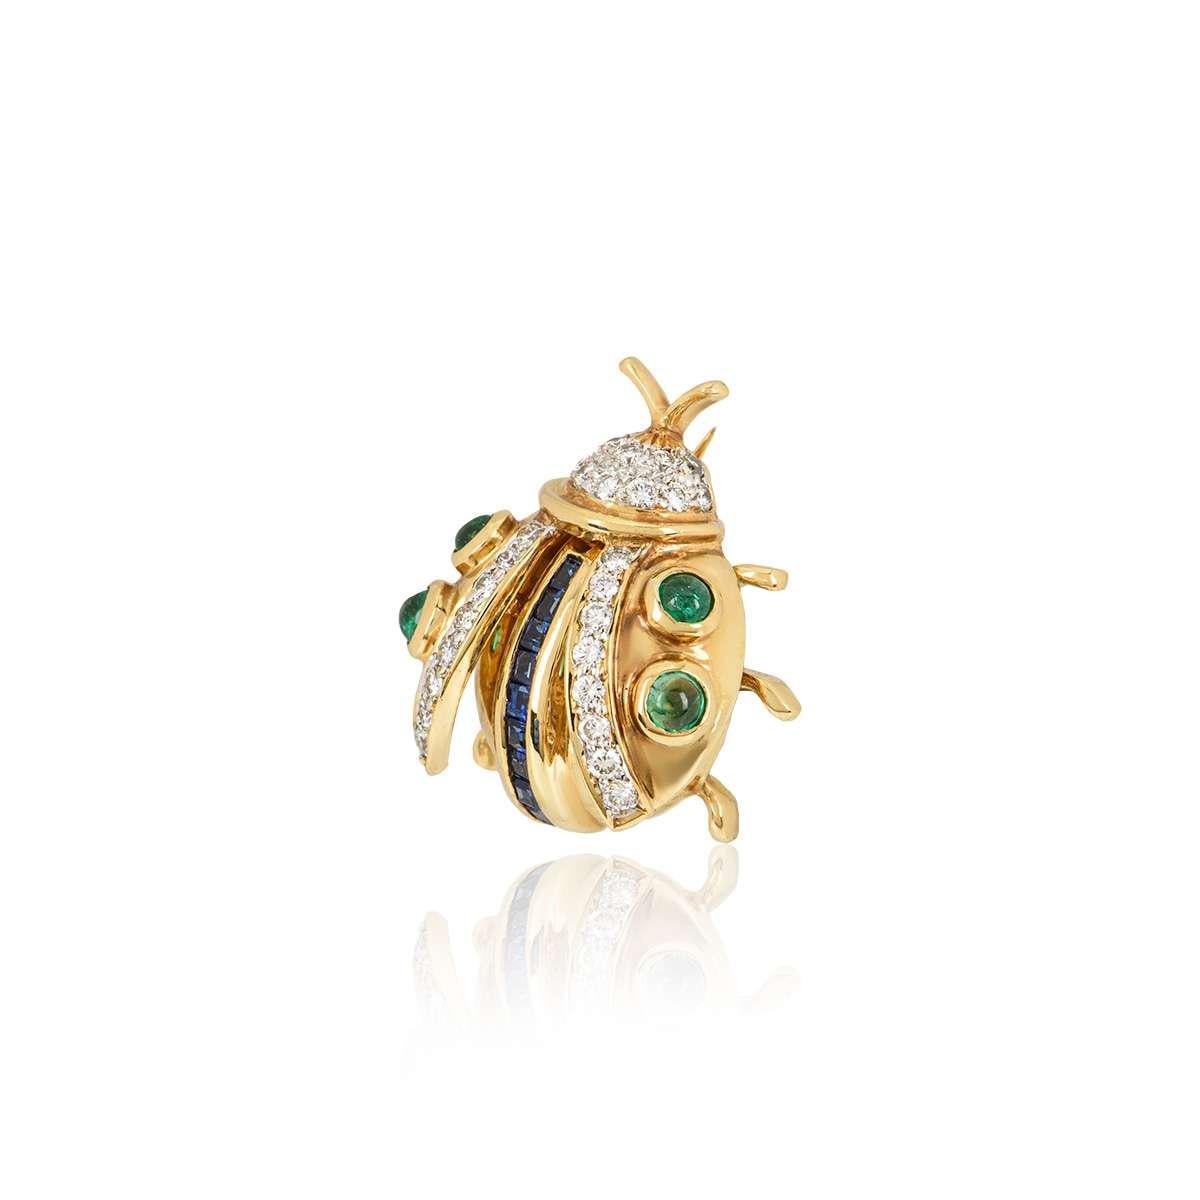 An 18k yellow gold Ladybird brooch. The brooch is set with 4 cabochon emeralds throughout the wings, with a row of 9 square cut sapphires running through the centre of the body and 28 round brilliant cut diamonds set in the wings and head. The